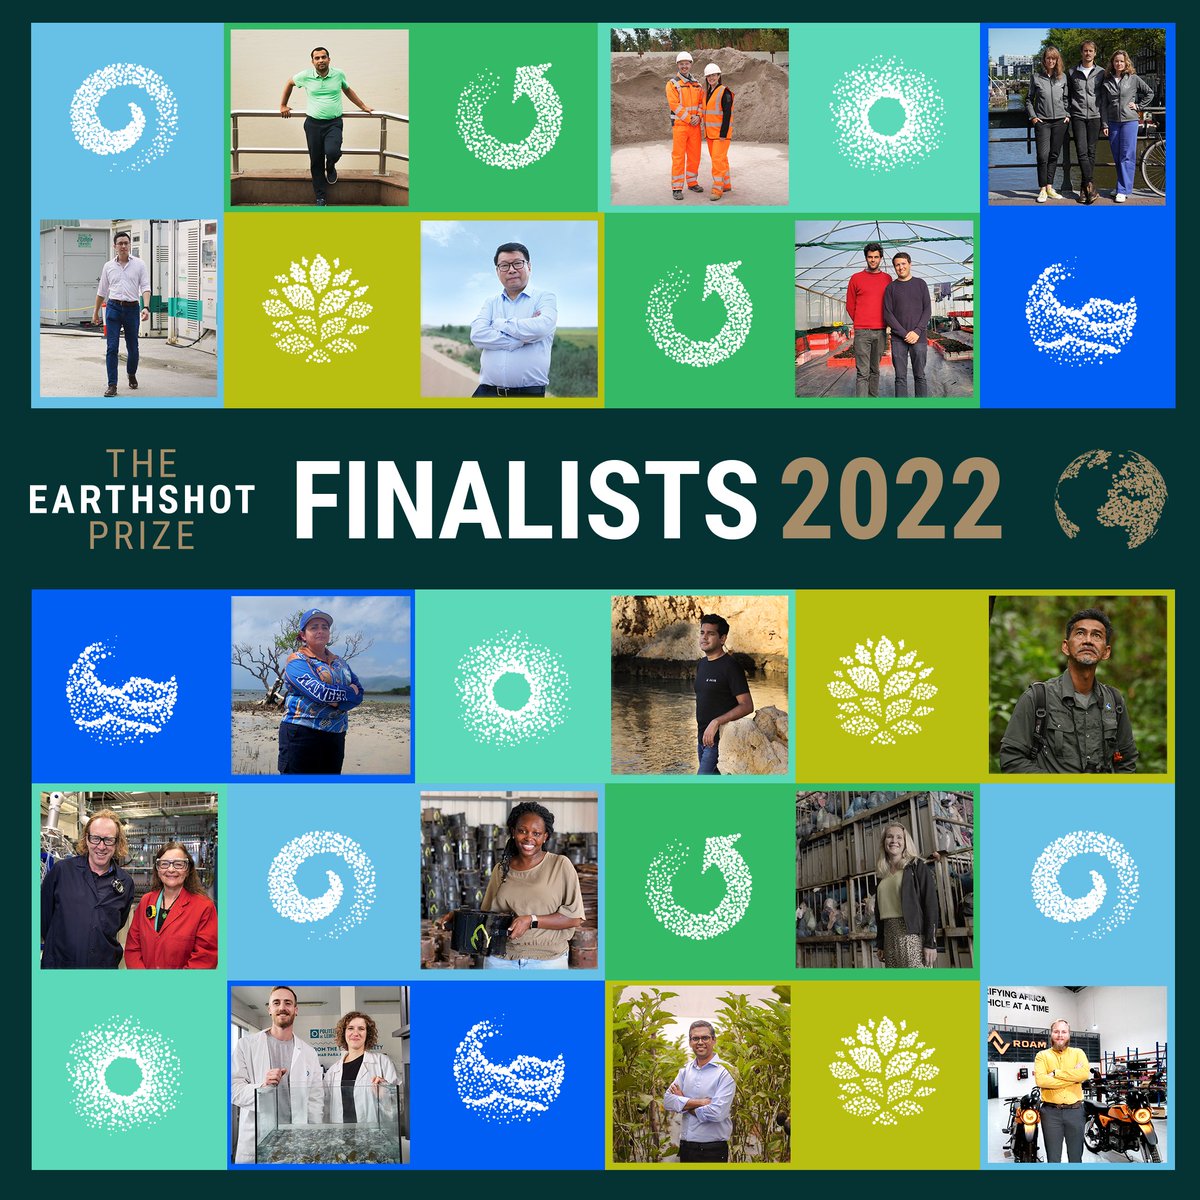 We are so excited to welcome all 2022 Finalists to The @EarthshotPrize family! Best of luck to the #ReviveOurOceans finalists @Bubble_Barrier, @ForesterSea & Australia's own @QldWomenRangers - 3 wonderful groups that support our world's oceans!